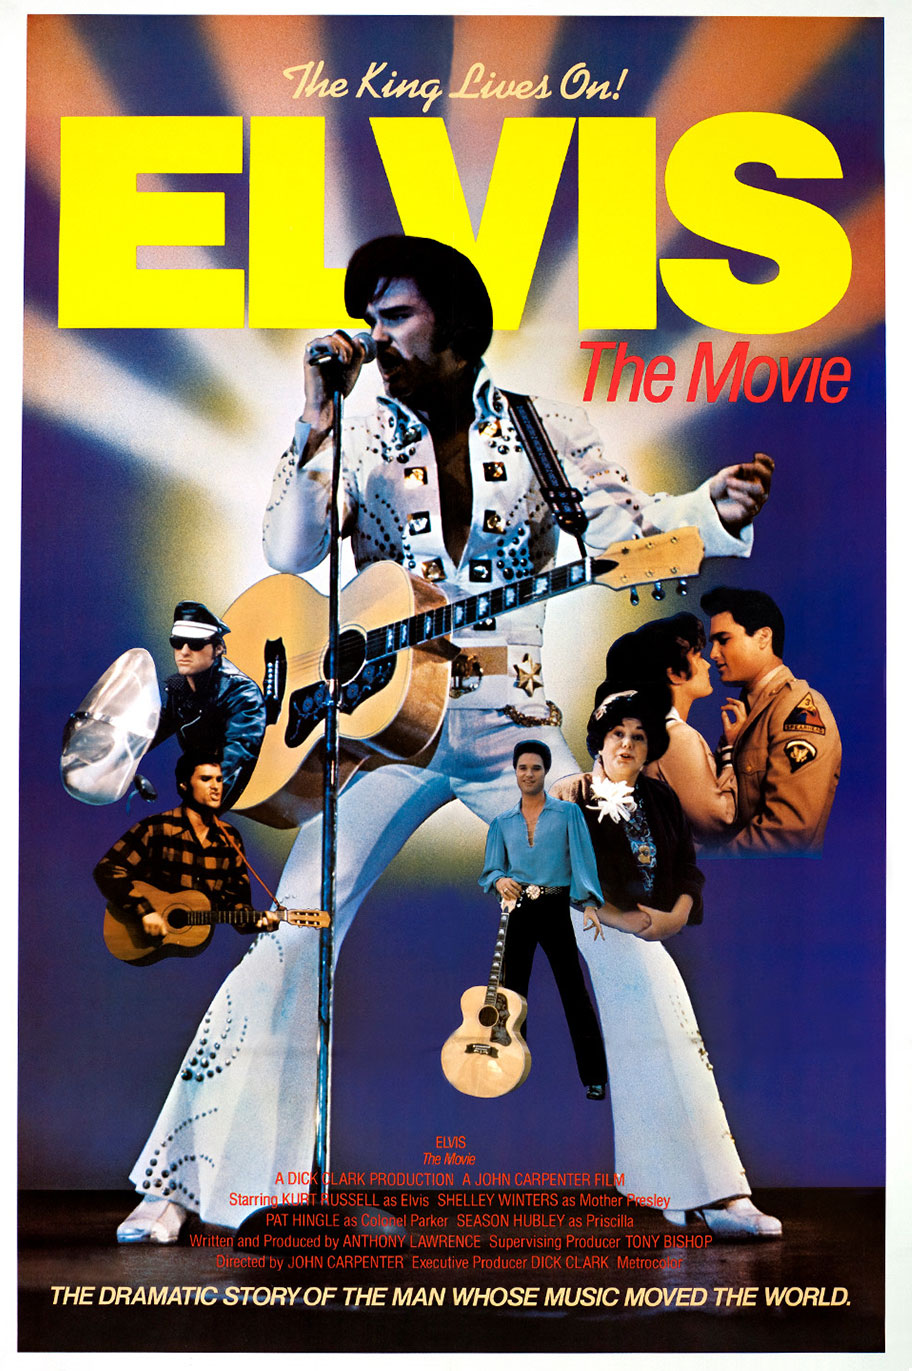 The poster include multiple images of Russell as Elvis, with the tagline "the dramatic story of the man who... moved the world".